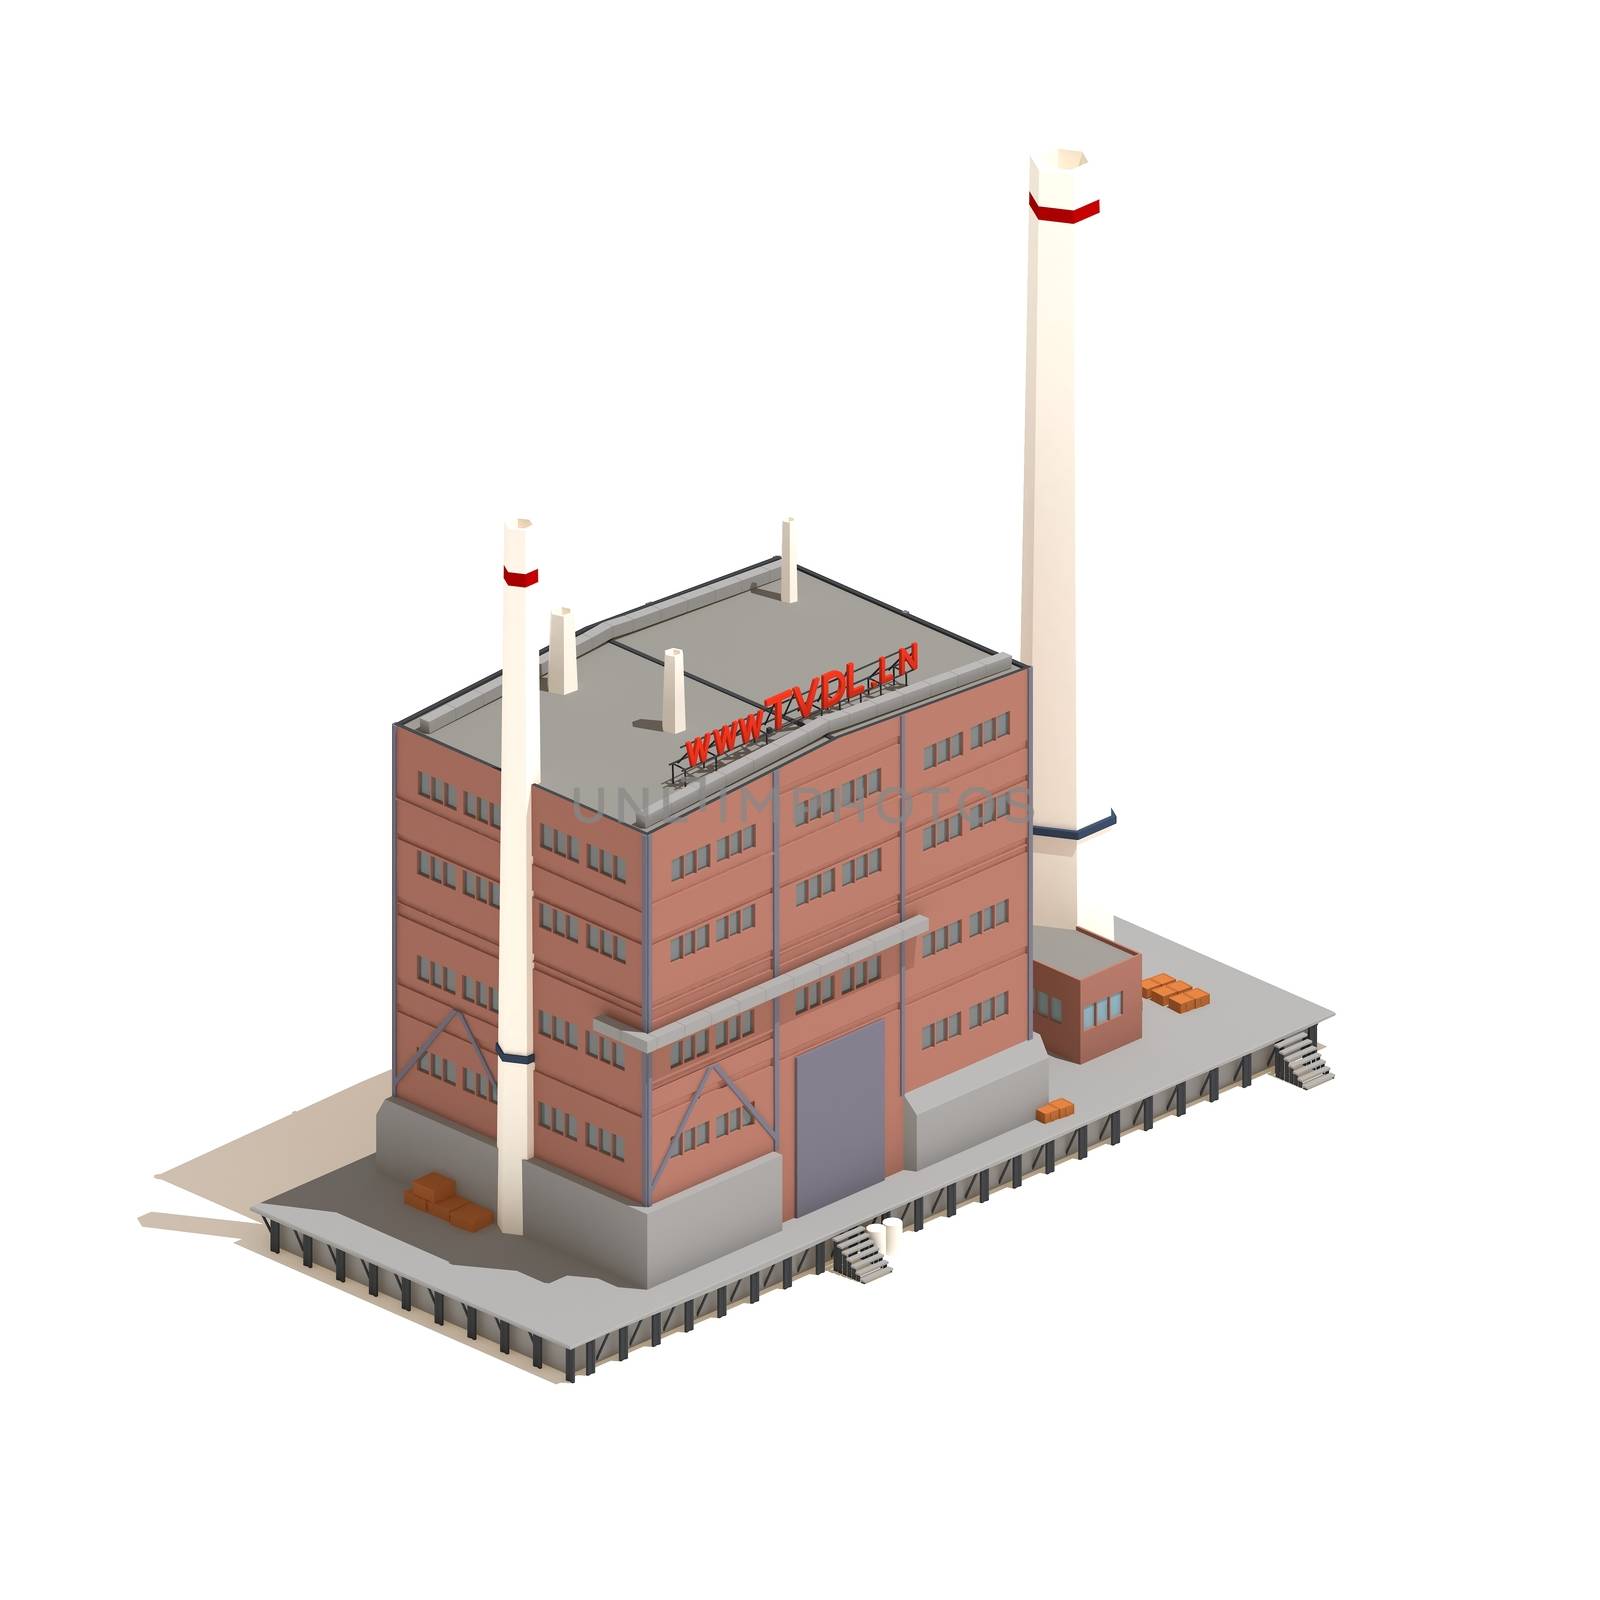 Flat 3d model isometric red brick industry or factory building illustration isolated on white background.